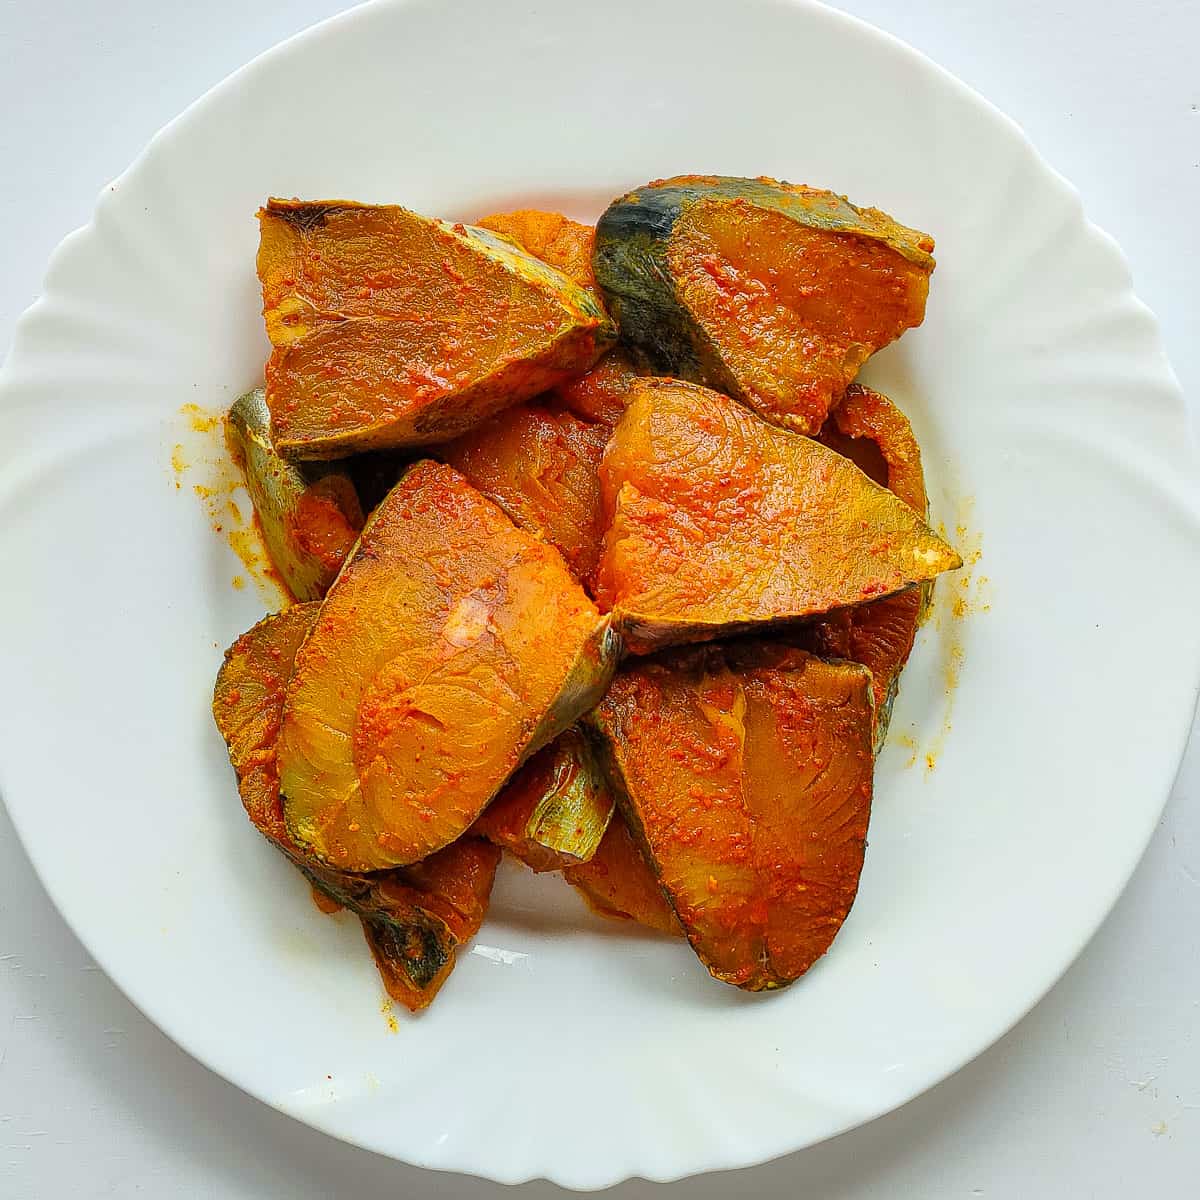 Mackerel fish seasoned with spices on a white plate.